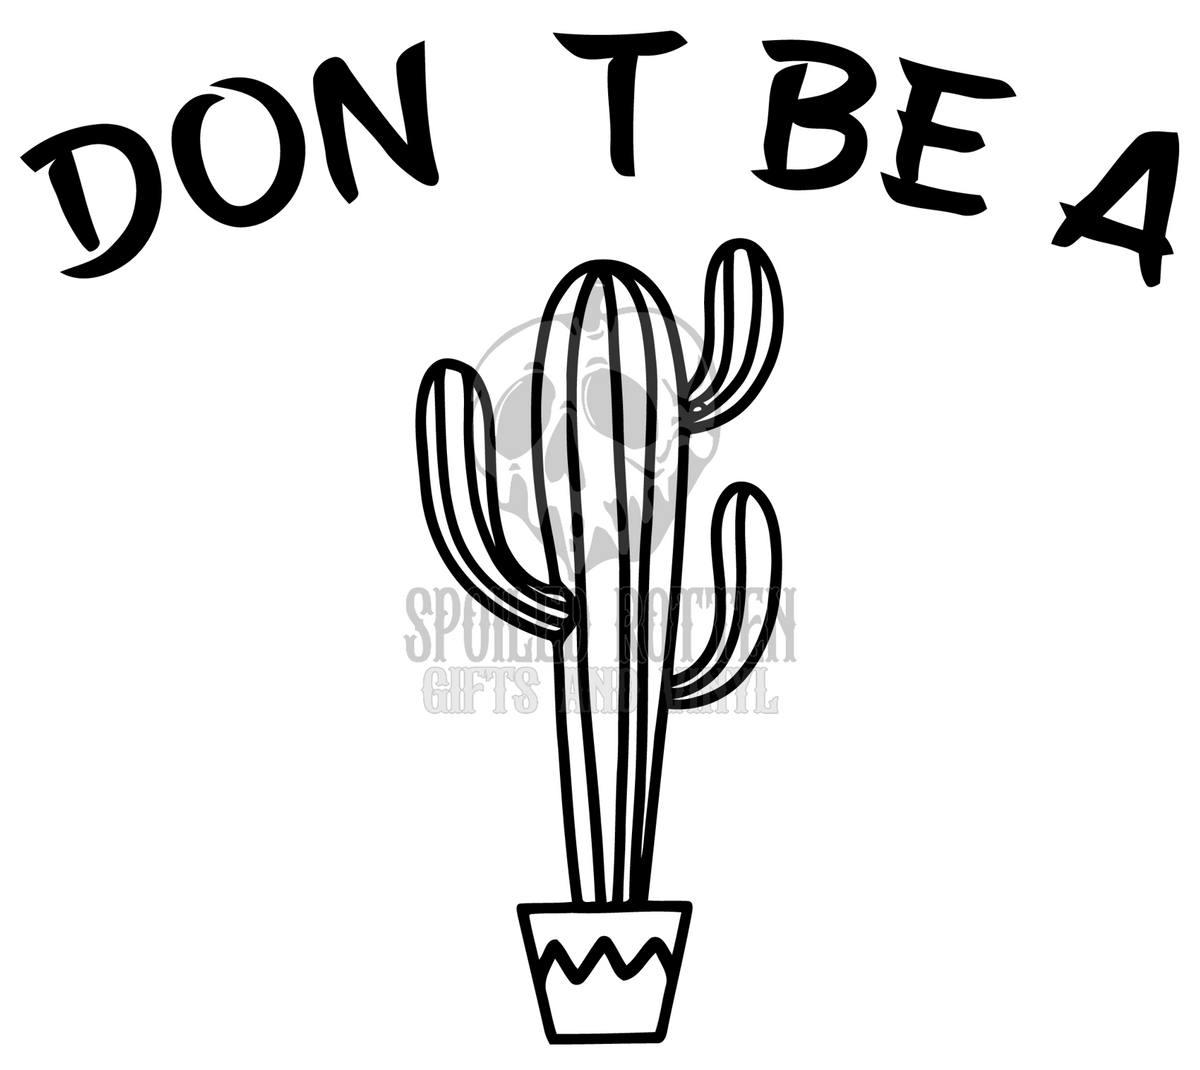 Don't be a Prick decal sticker